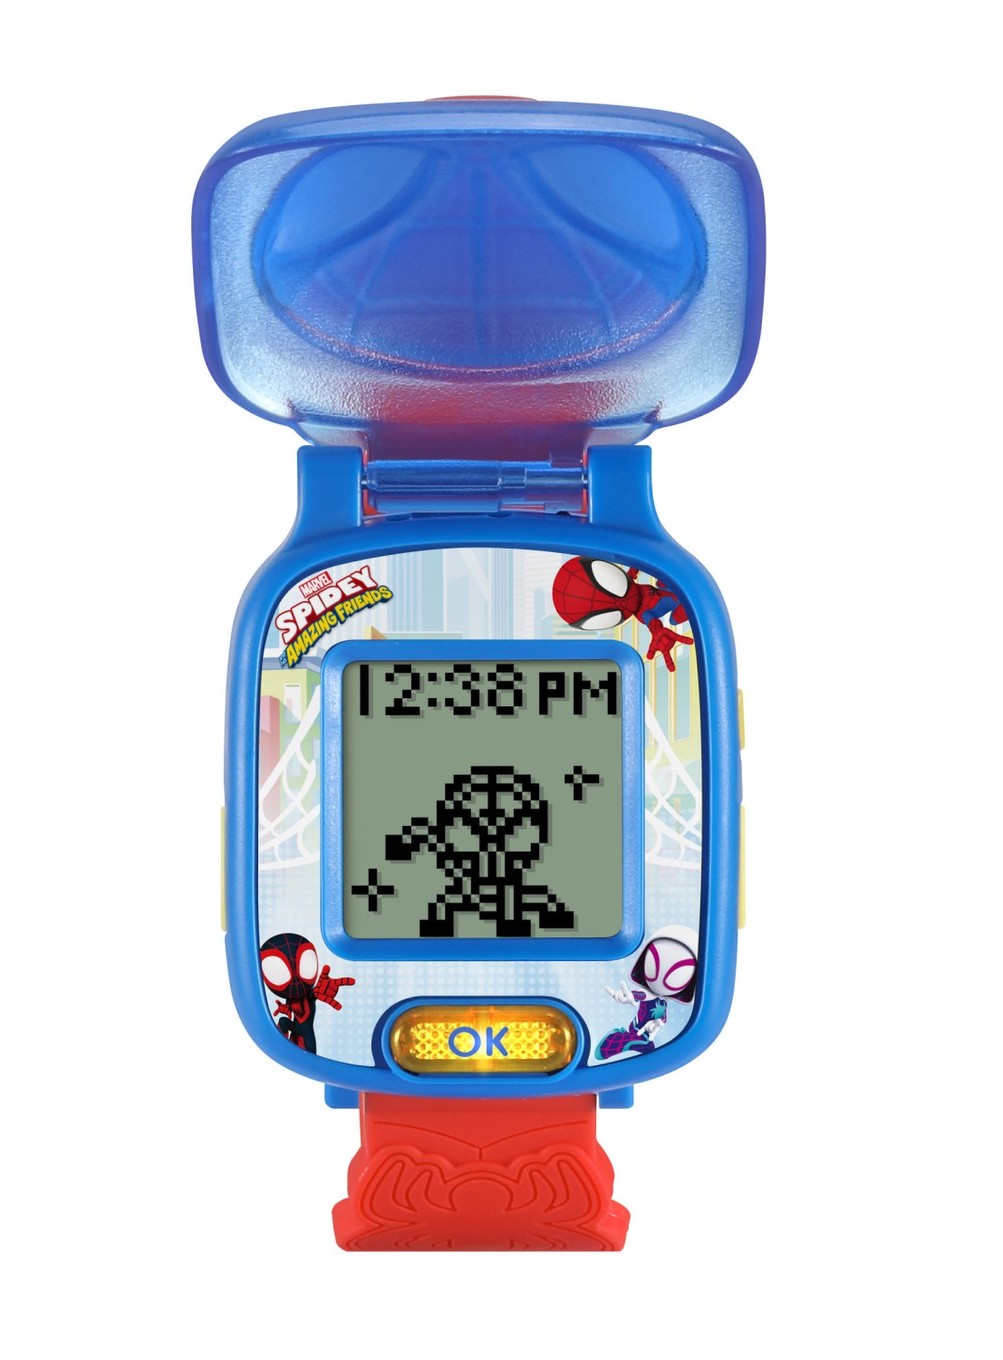 Buy Kids Smart Watch Girls Boys - Smart Watch for Kids Watches for Ages  4-12 Years with 14 Puzzle Games Music Video Alarm Calculator Flashlight  Children Learning Toys Birthday Gifts Toddler Watch (